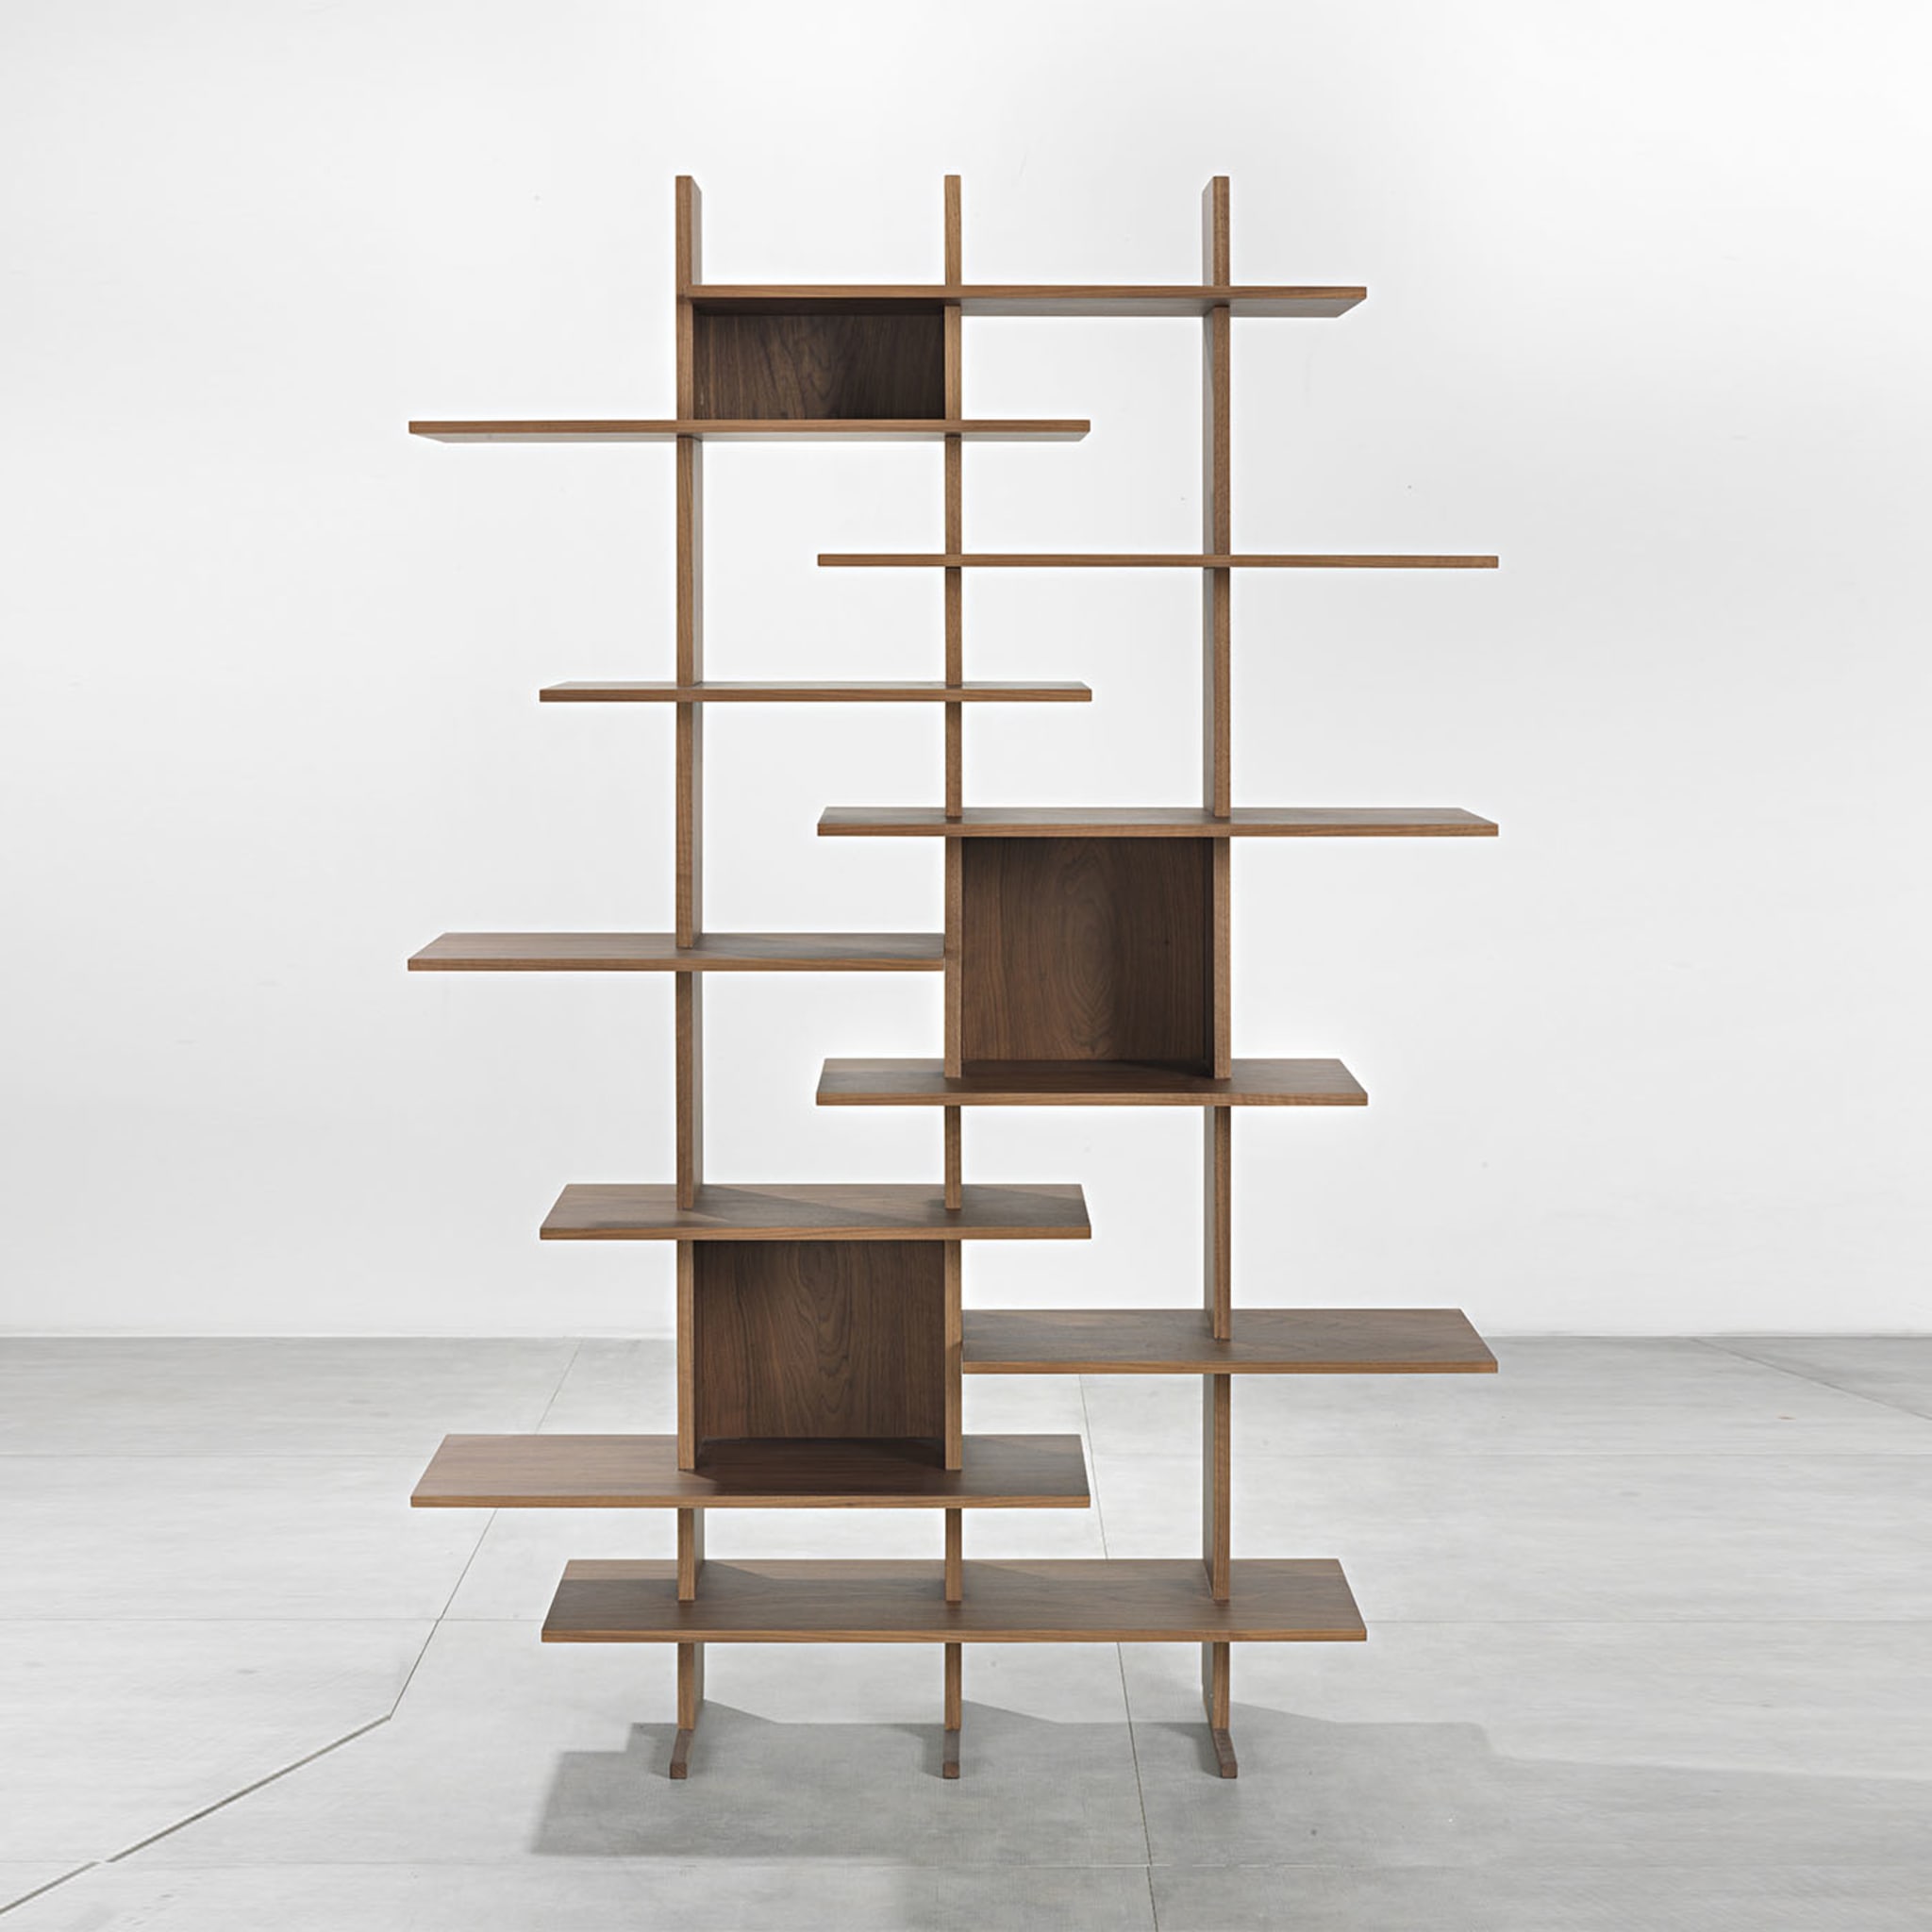 Elisabeth Bookcase #1 by Cesare Arosio and Beatrice Fanchini - Alternative view 1